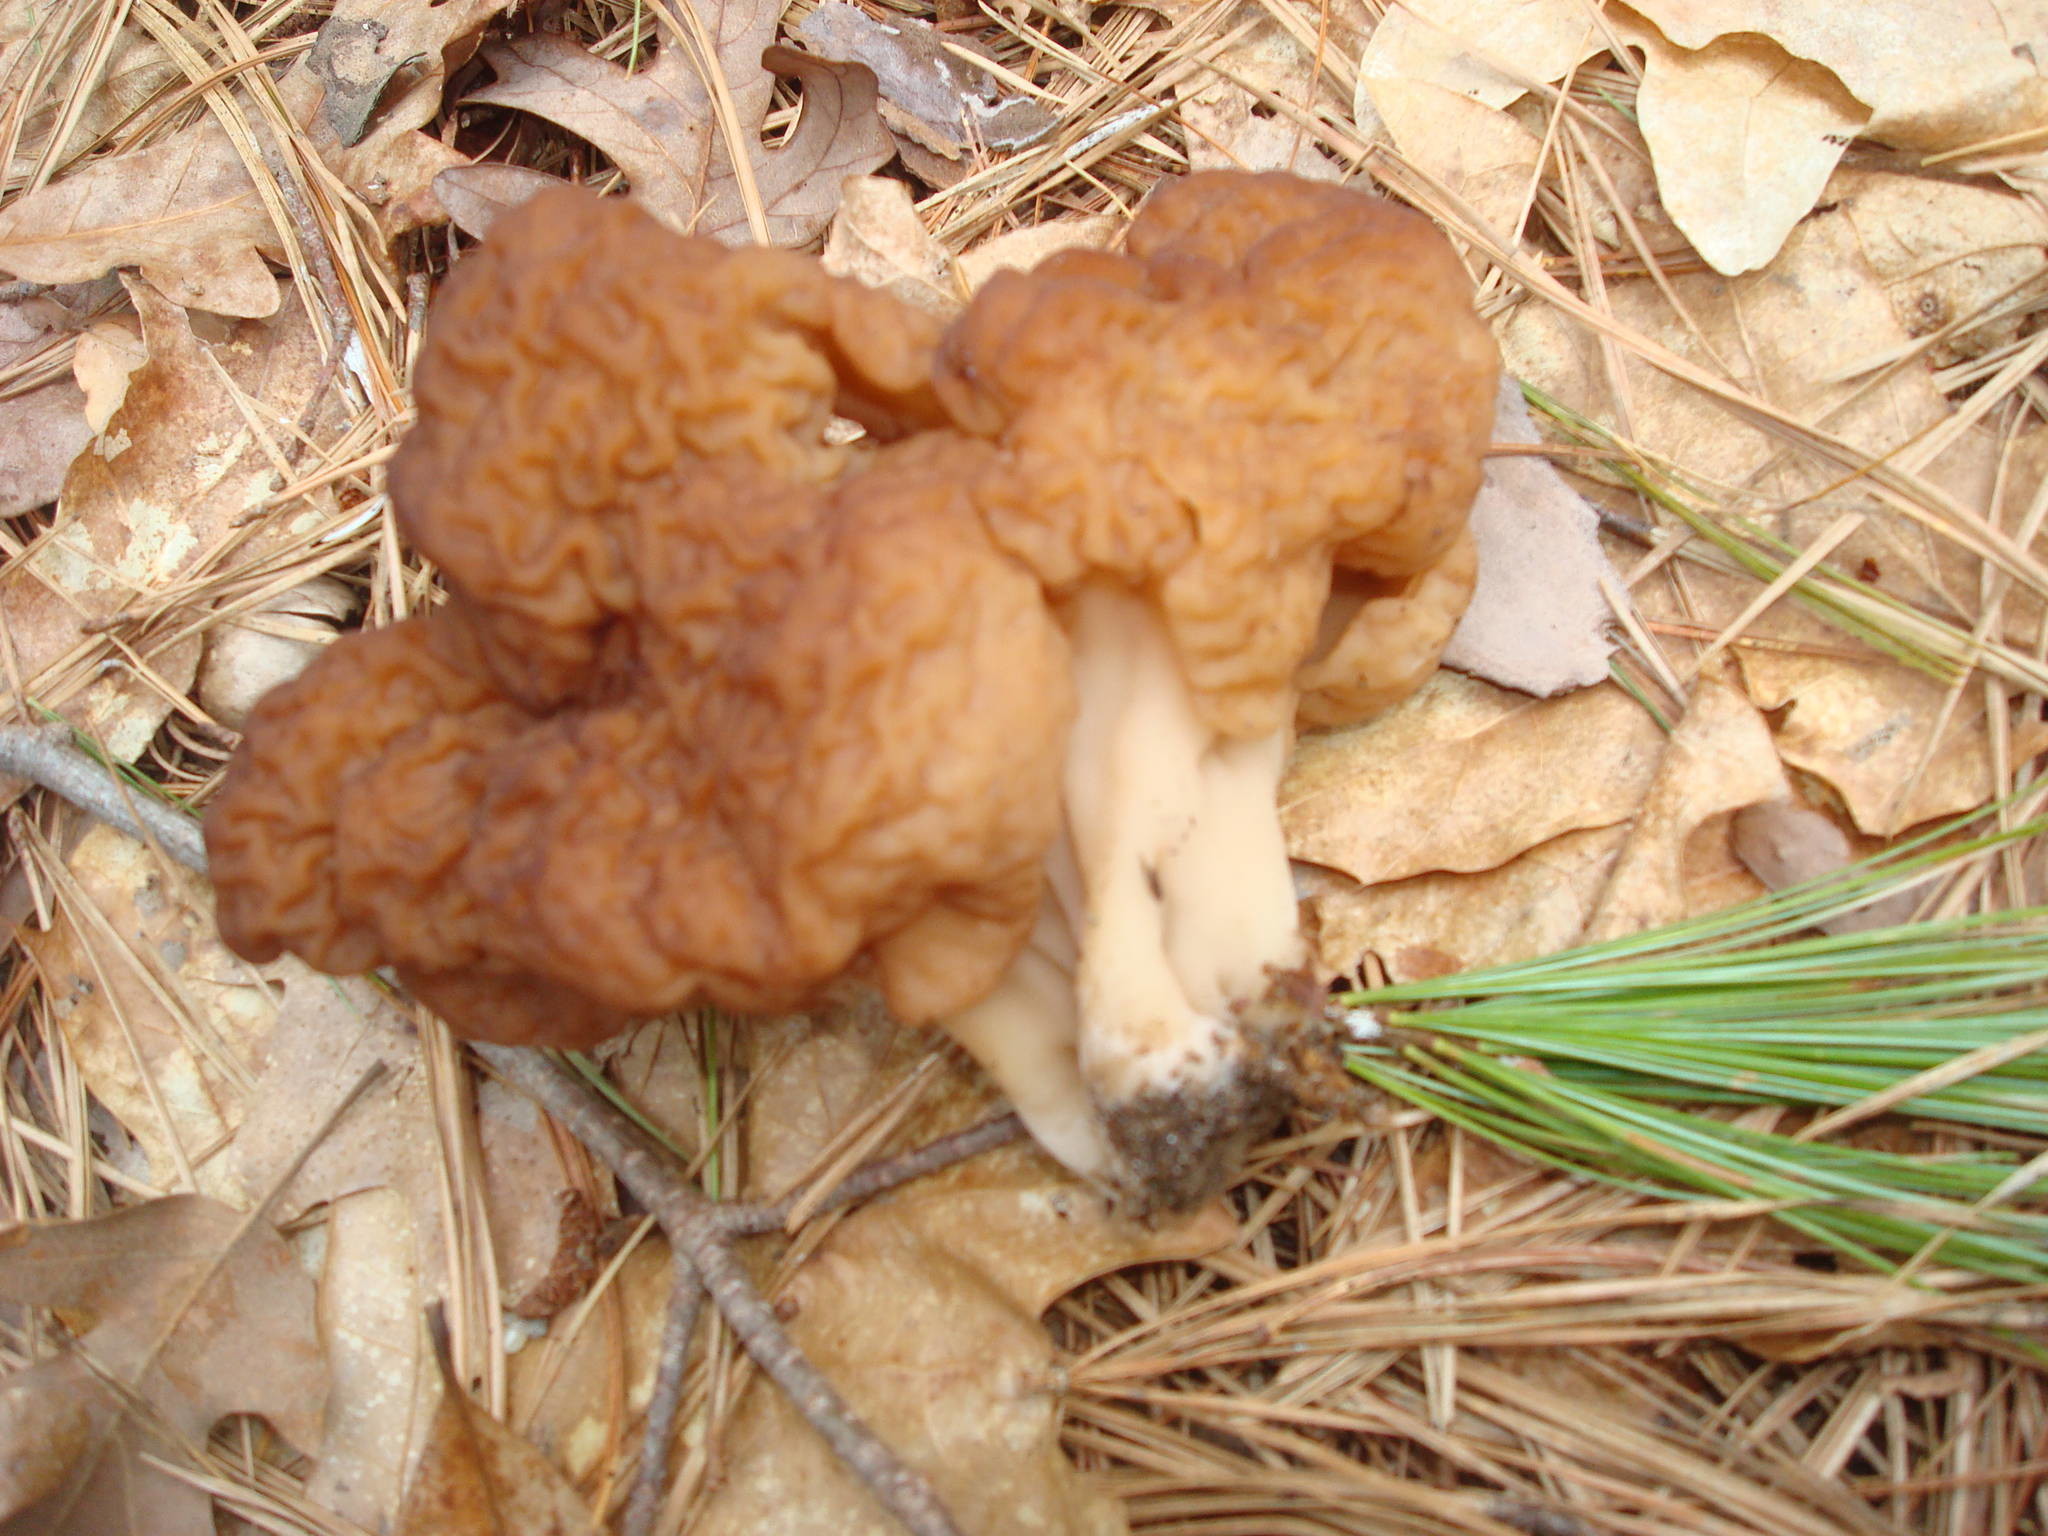 2048x1536 Looking for morels. Found about 30 gyromitra.